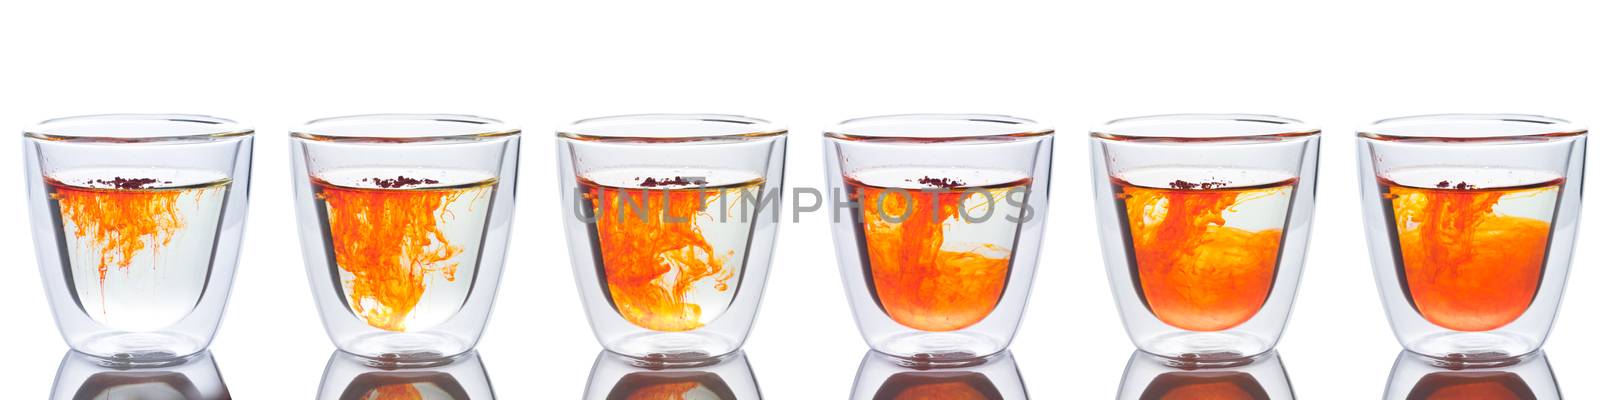 orange color spread in glass of water by zneb076